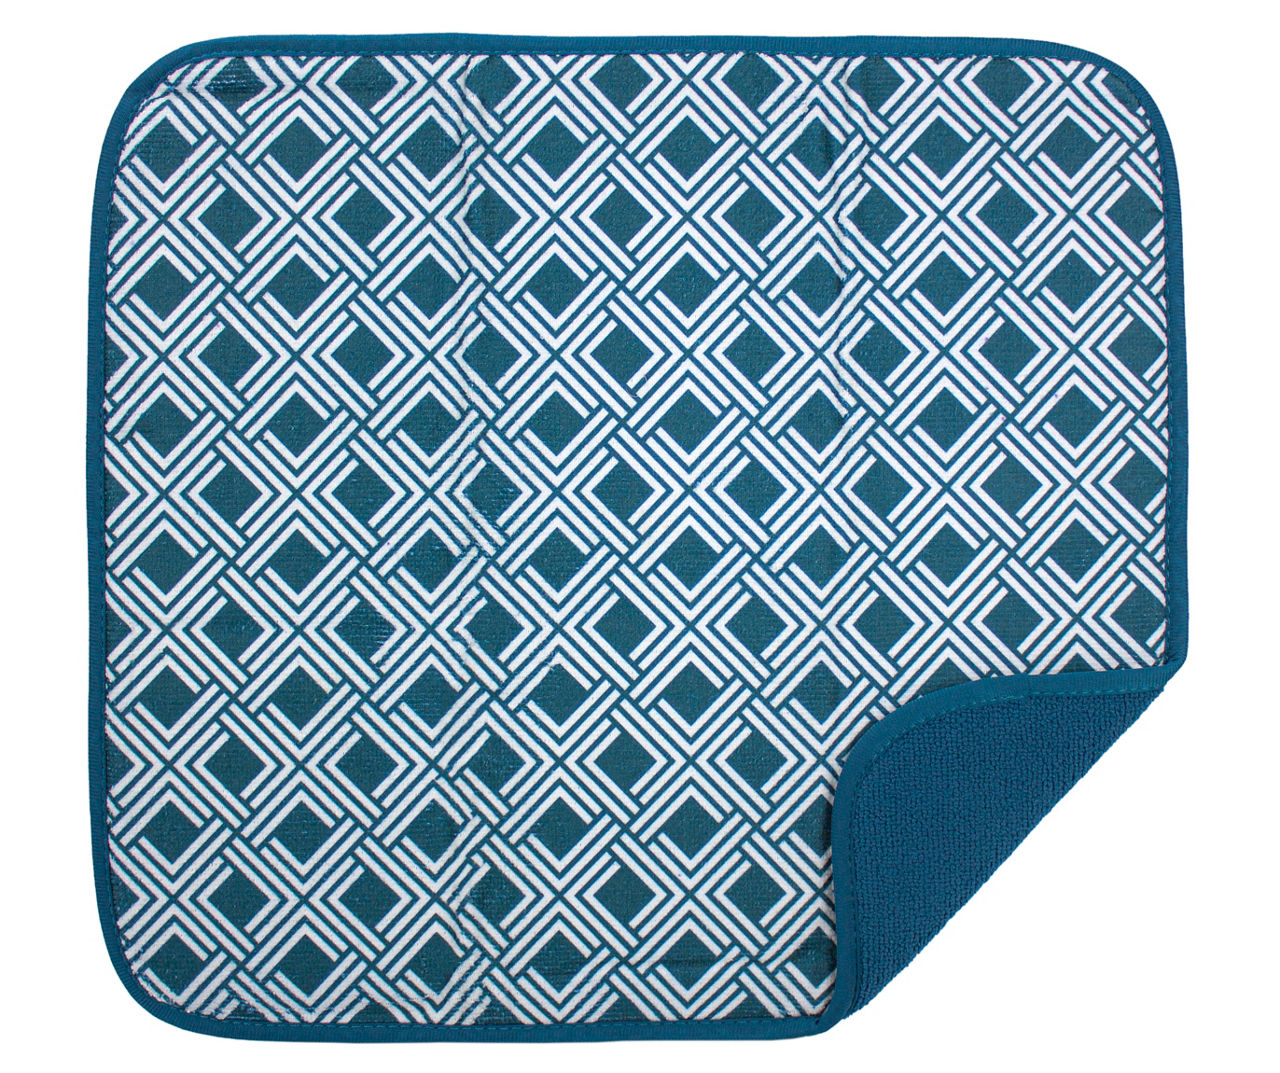 Cuisinart Dish Drying Mat With Rack For Kitchen Counter 